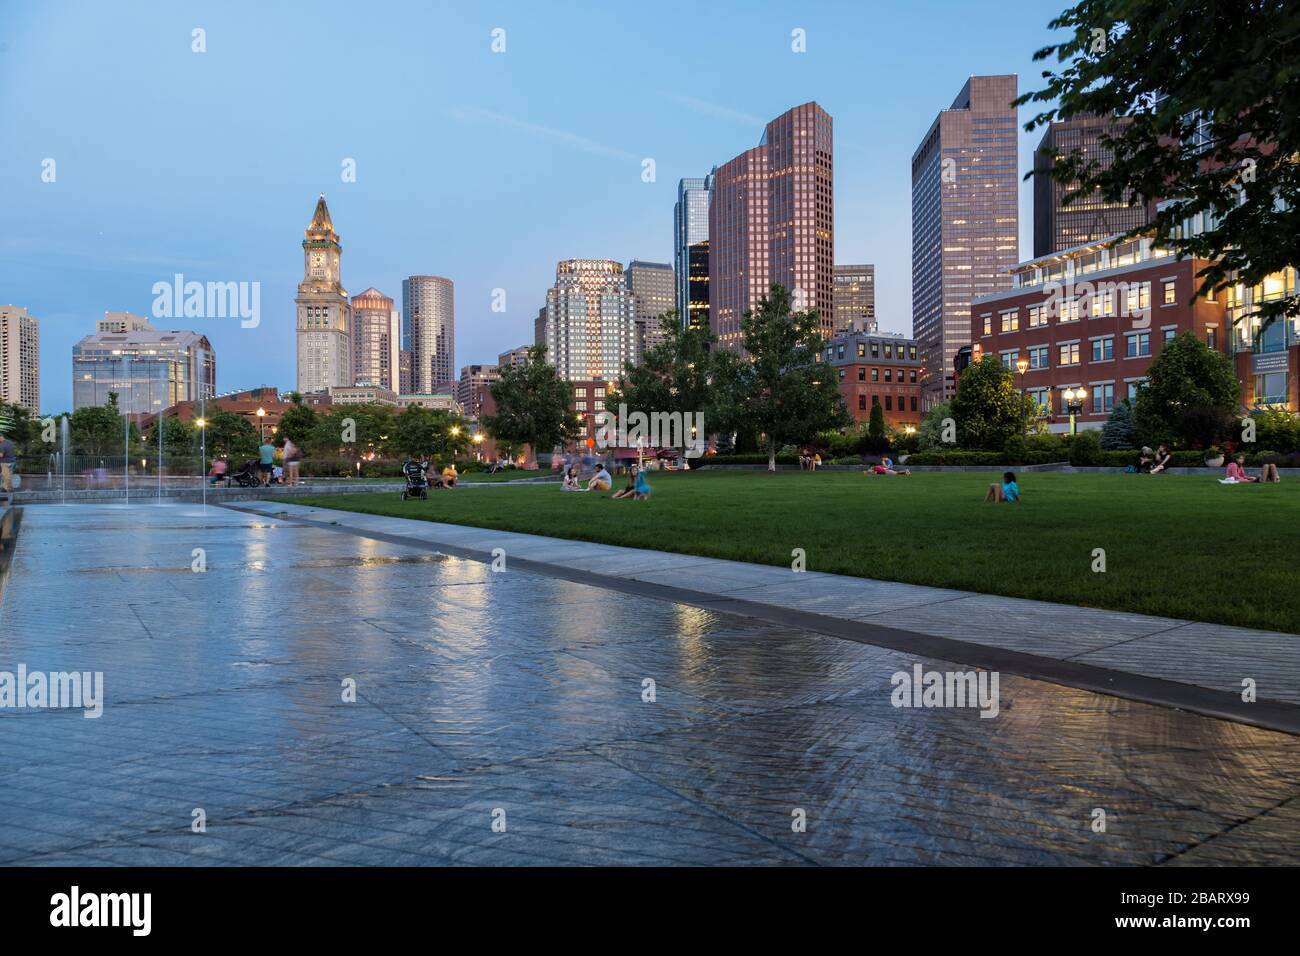 Rose Kennedy Greenway Park, Boston Banque D'Images